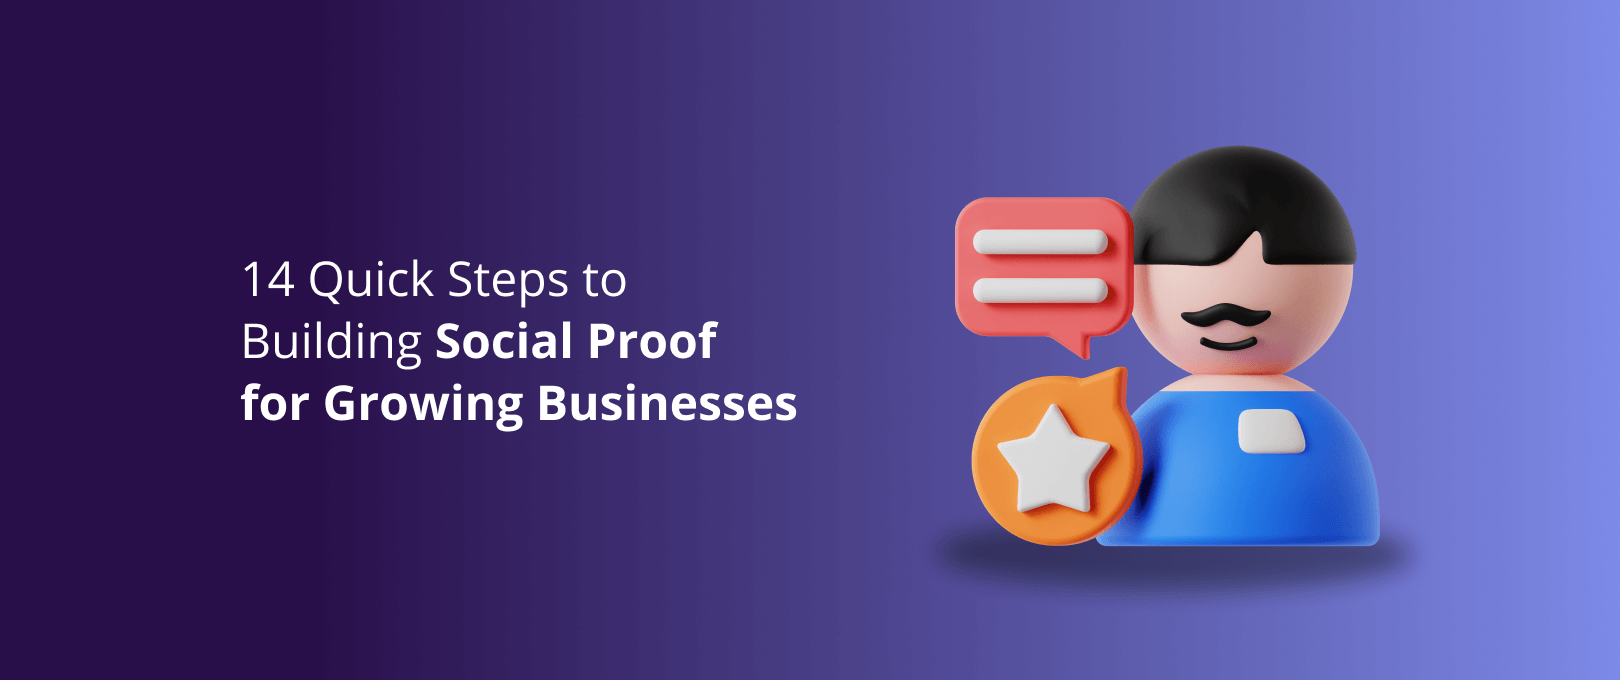 14 Quick Steps to Building Social Proof for Growing Businesses DevriX